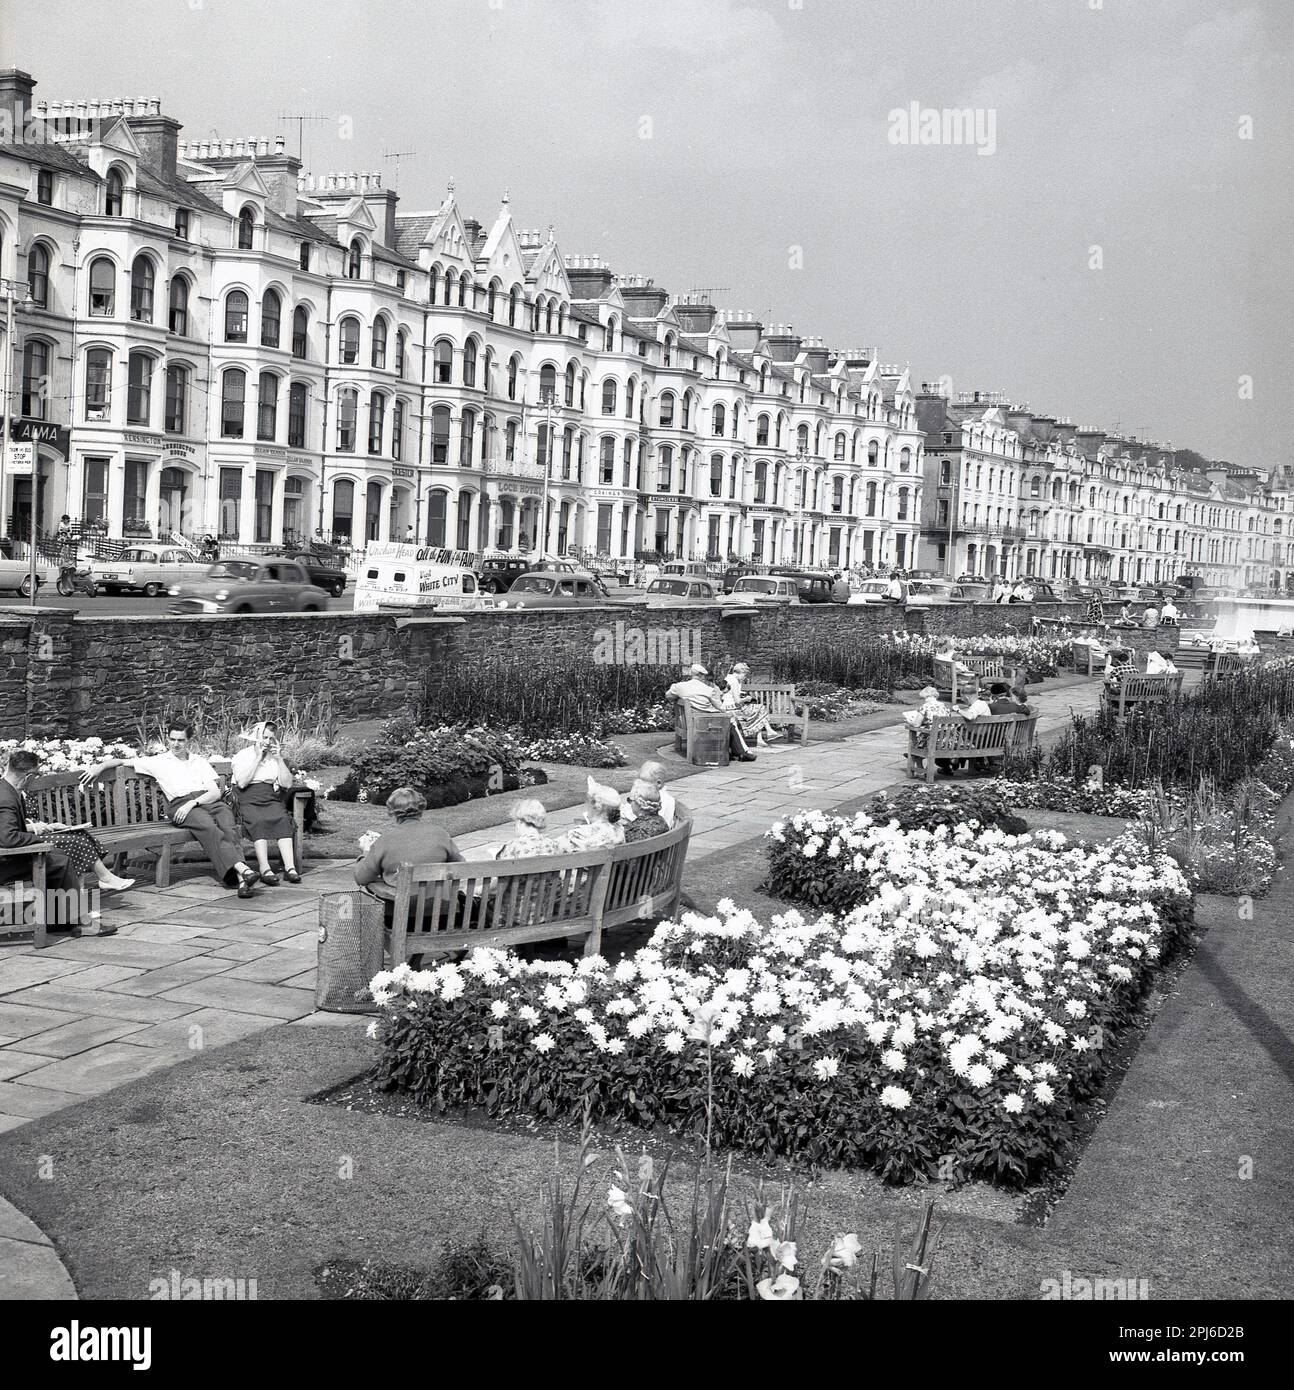 1950s, historical view from this era of people siting on benches at the seafront gardens at Brighton, England, UK. The victorian terraced was the home of many hotels catering for the holidaymakers. A van of the era is parked in the street advertising, Onchan Head...all the Fun of the Fair...Visit White City. Stock Photo